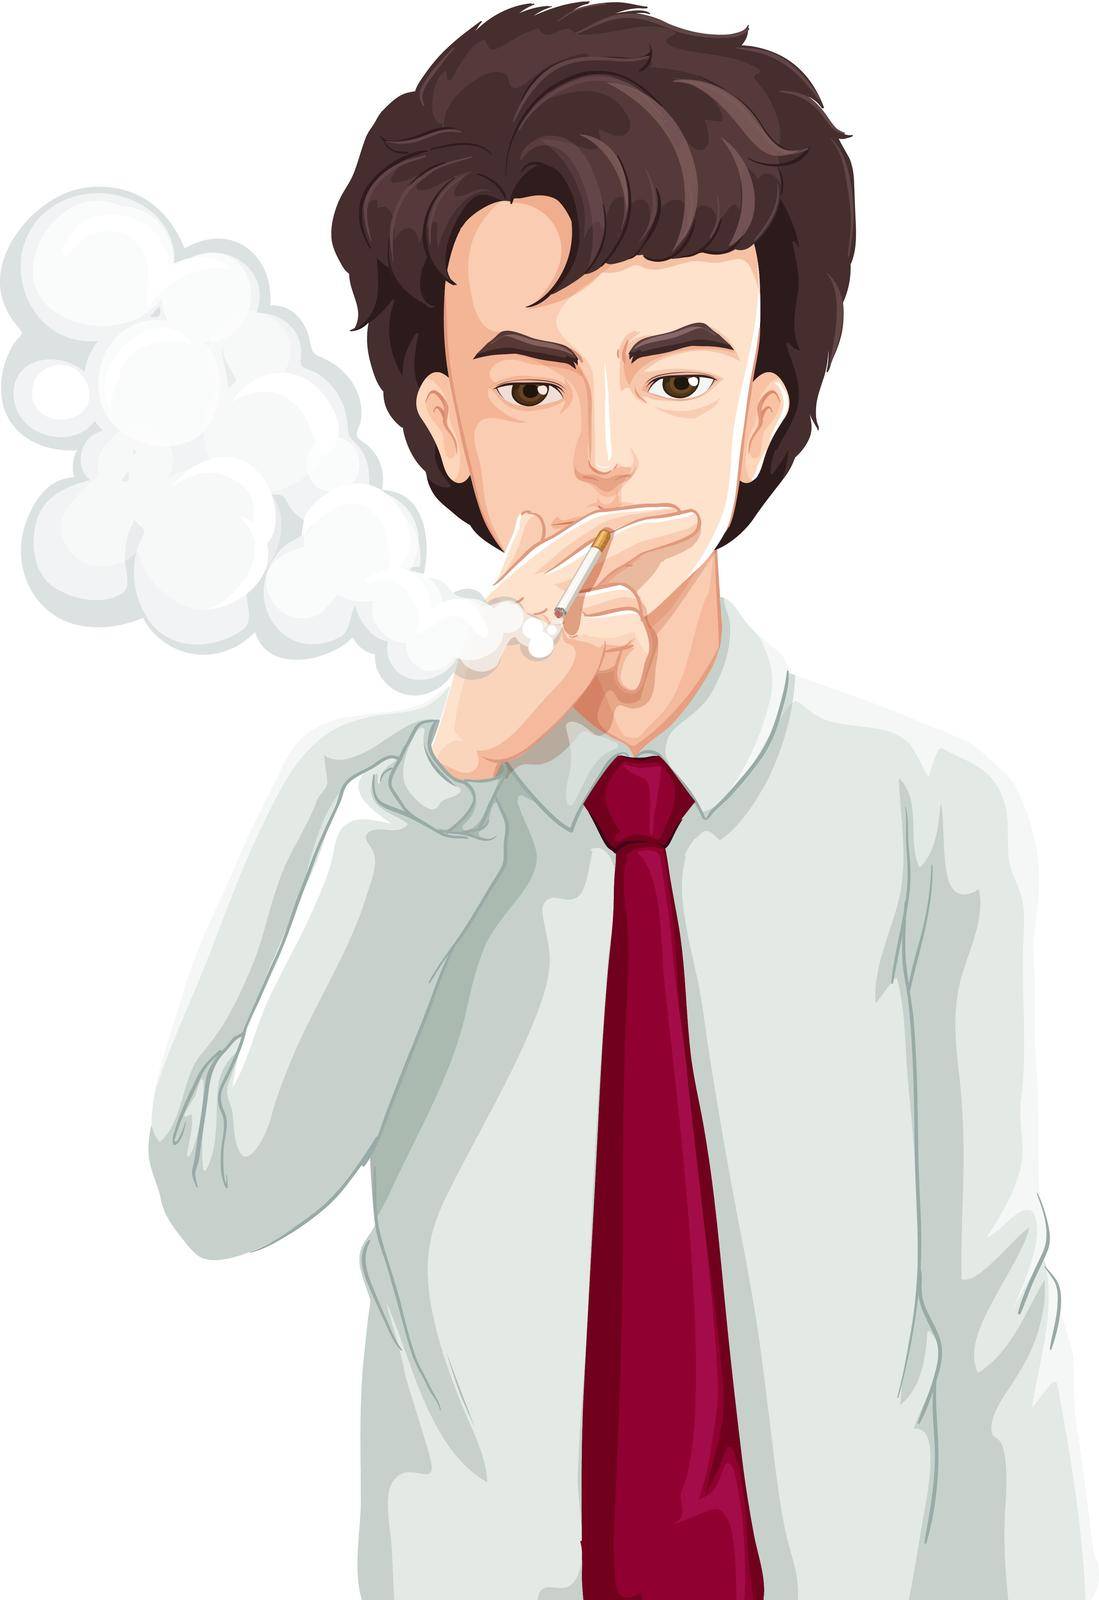 Illustration of a man smoking on a white background